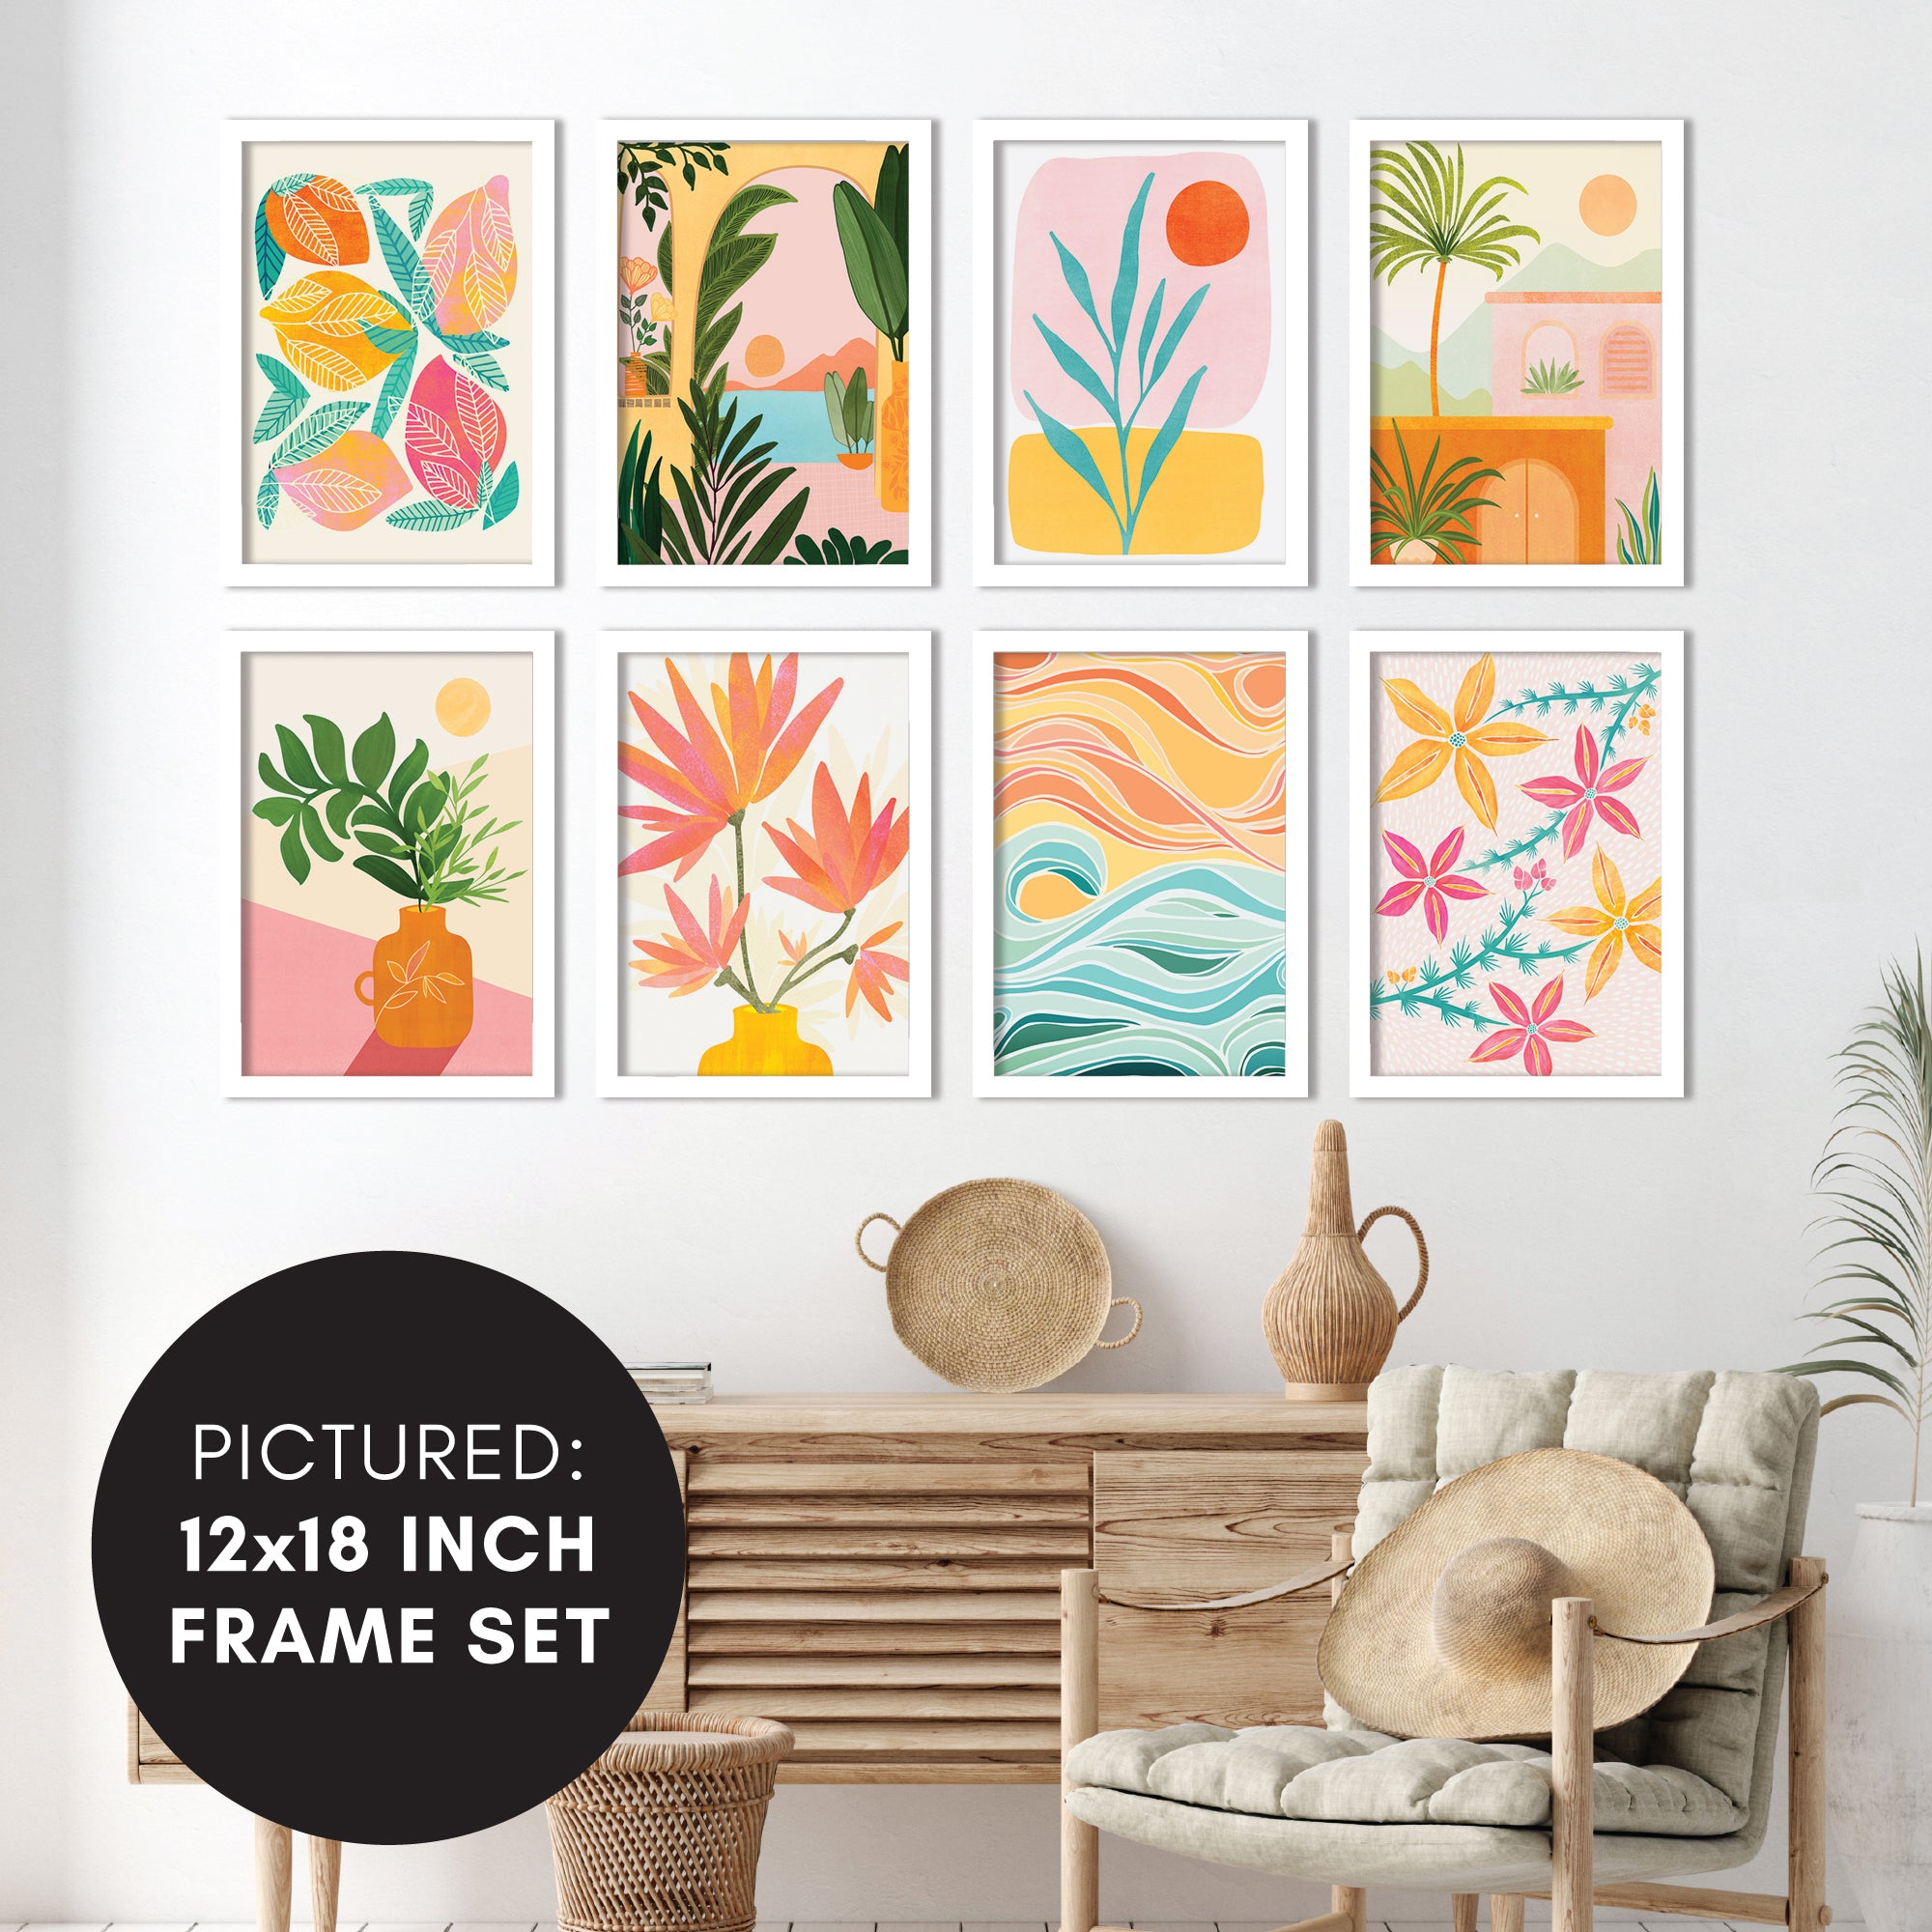 Premium Art Sets for Your Home Decor | Americanflat – Page 6